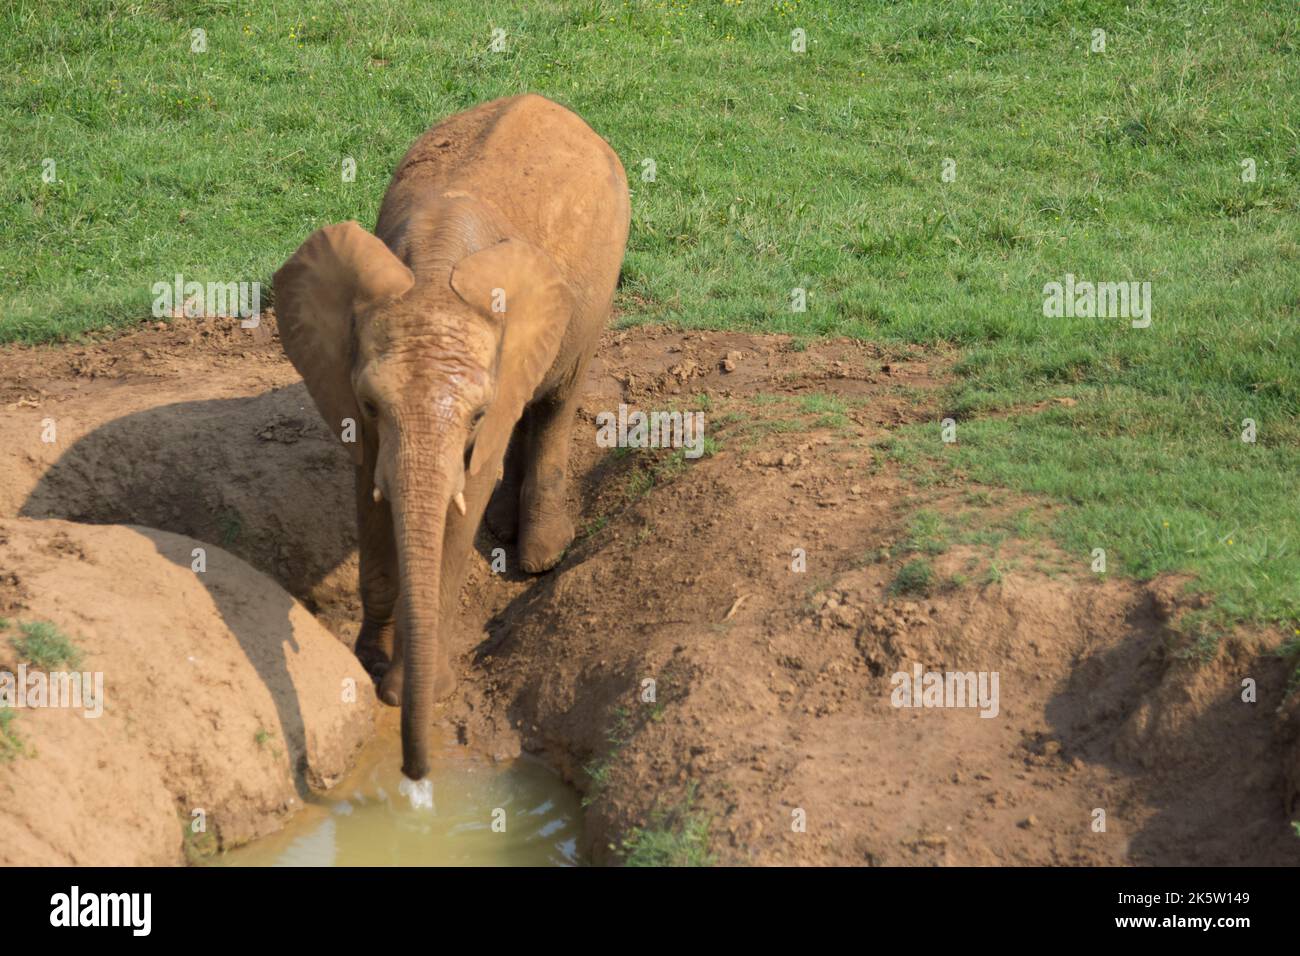 brown elephant drinking water from a pond in the ground with its trunk  Stock Photo